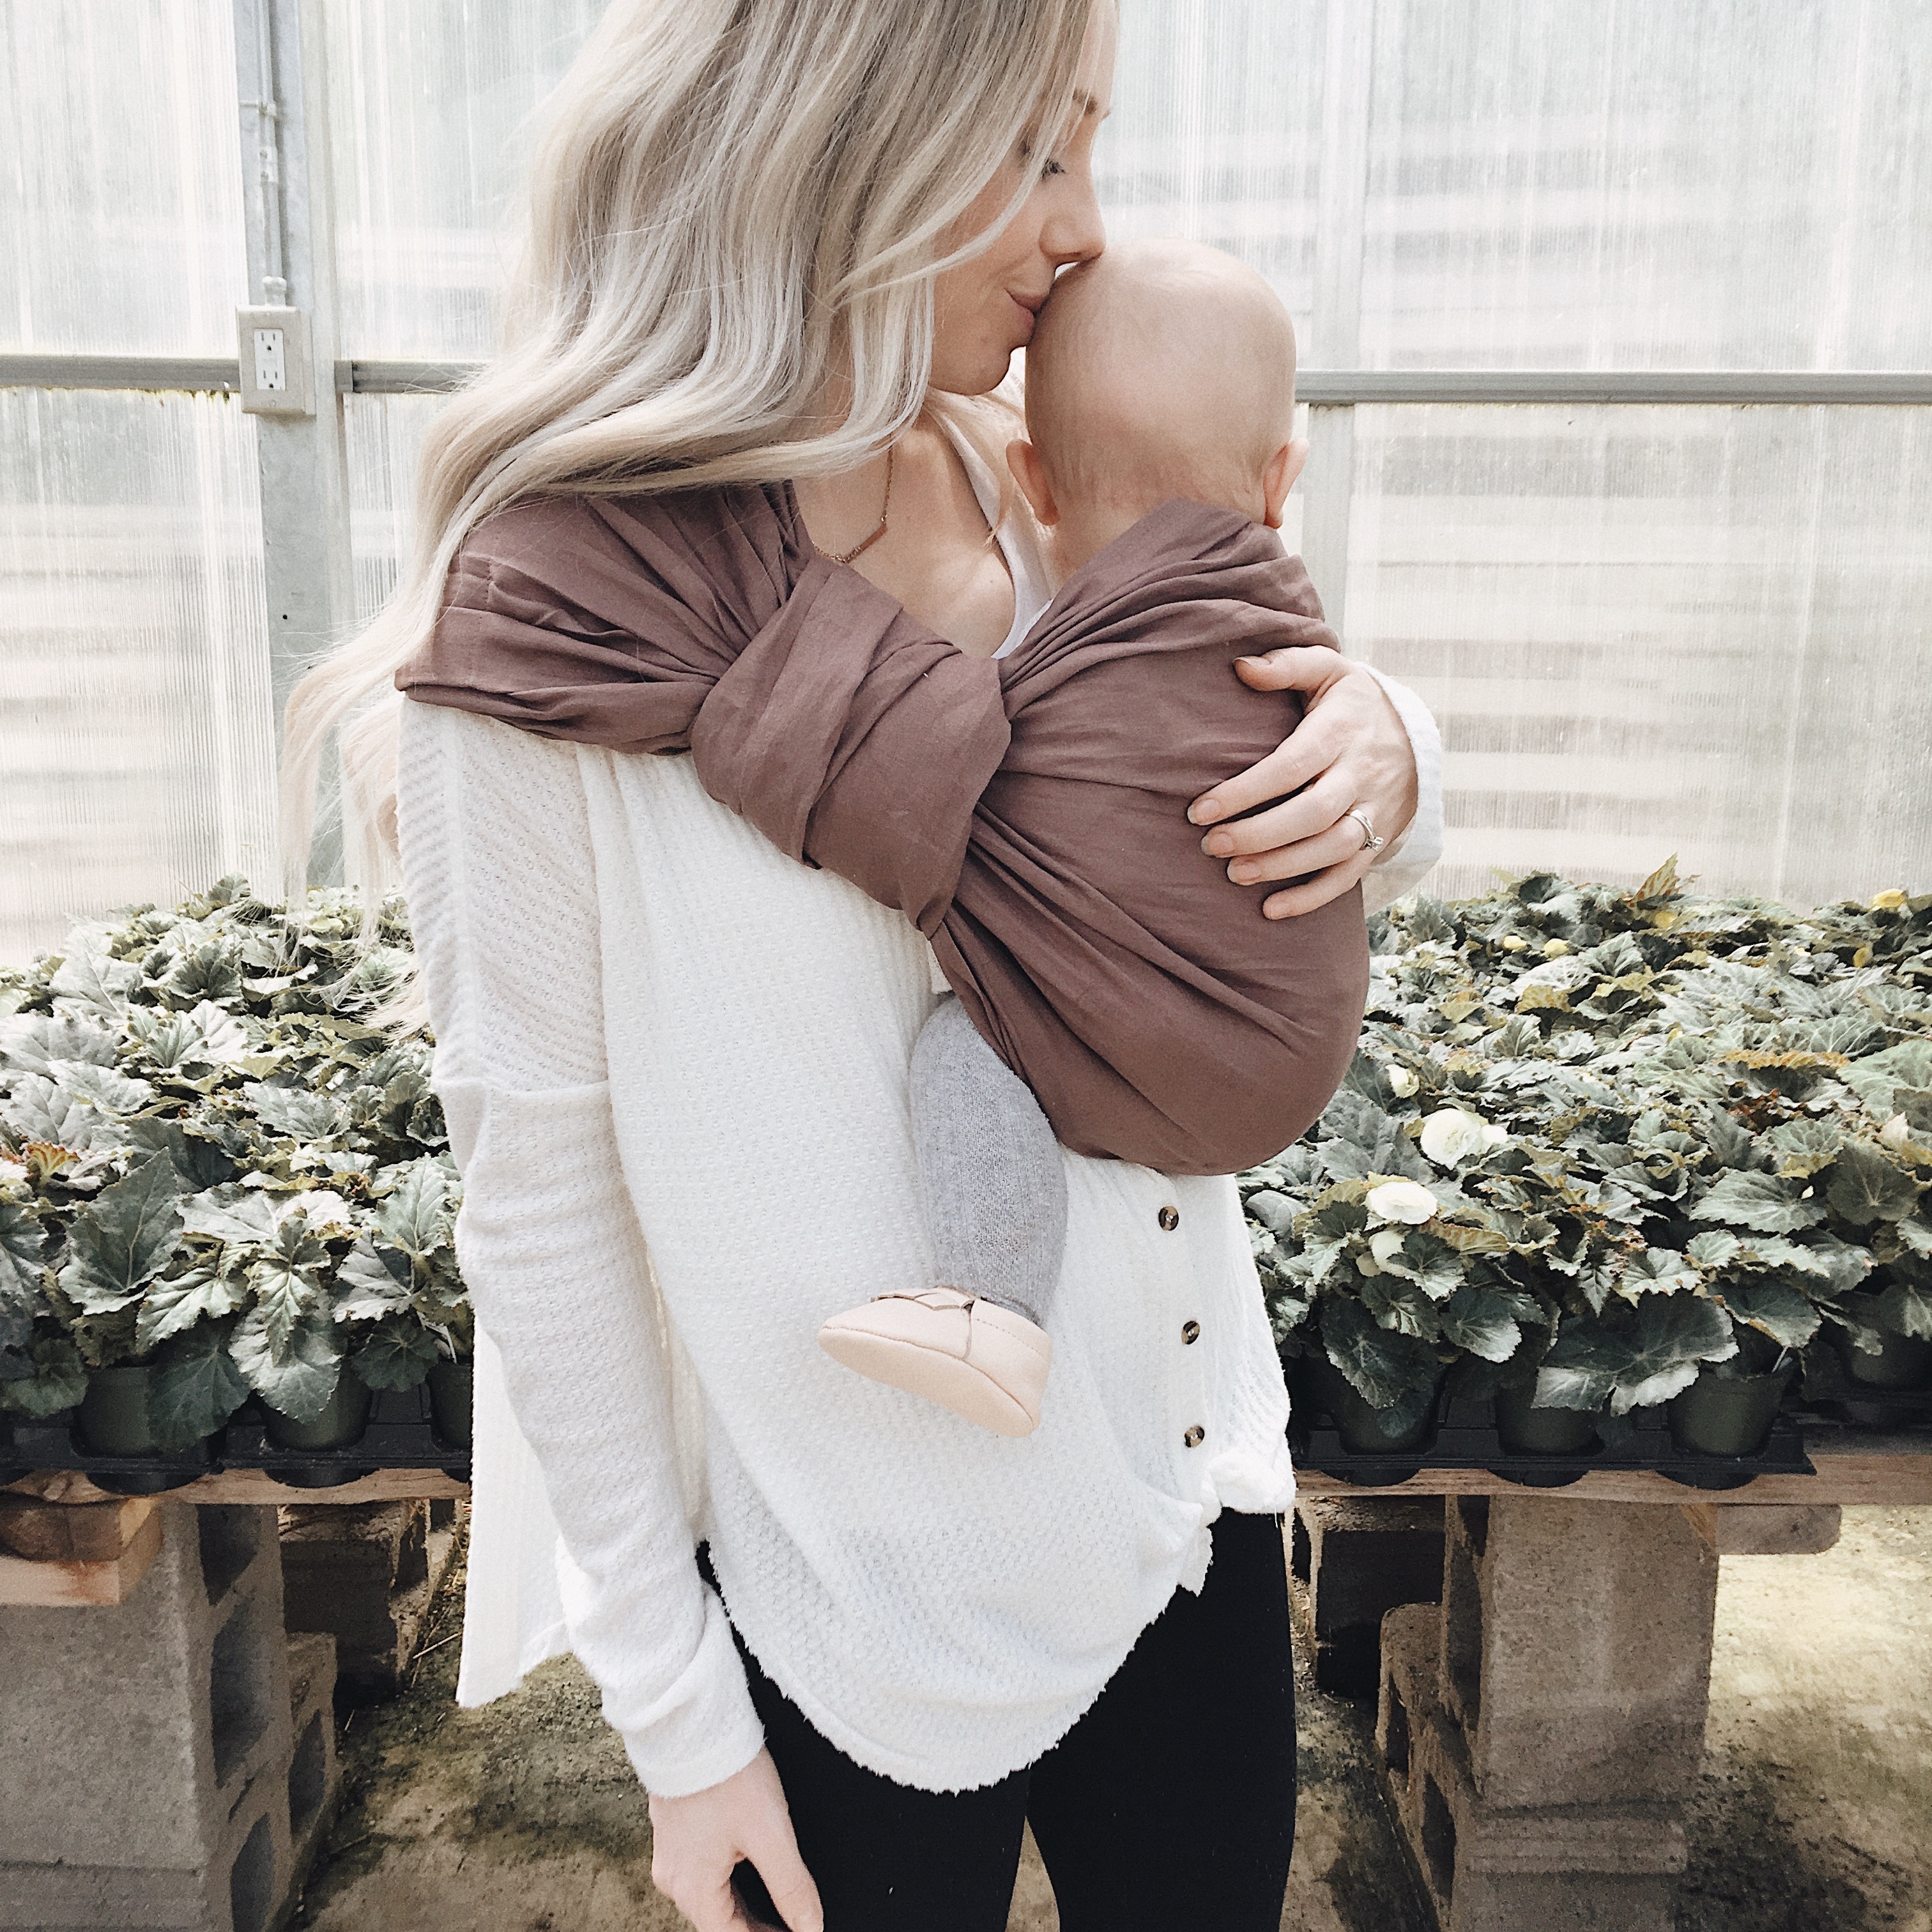 A mother holding her baby in a sling made by a Canadian business